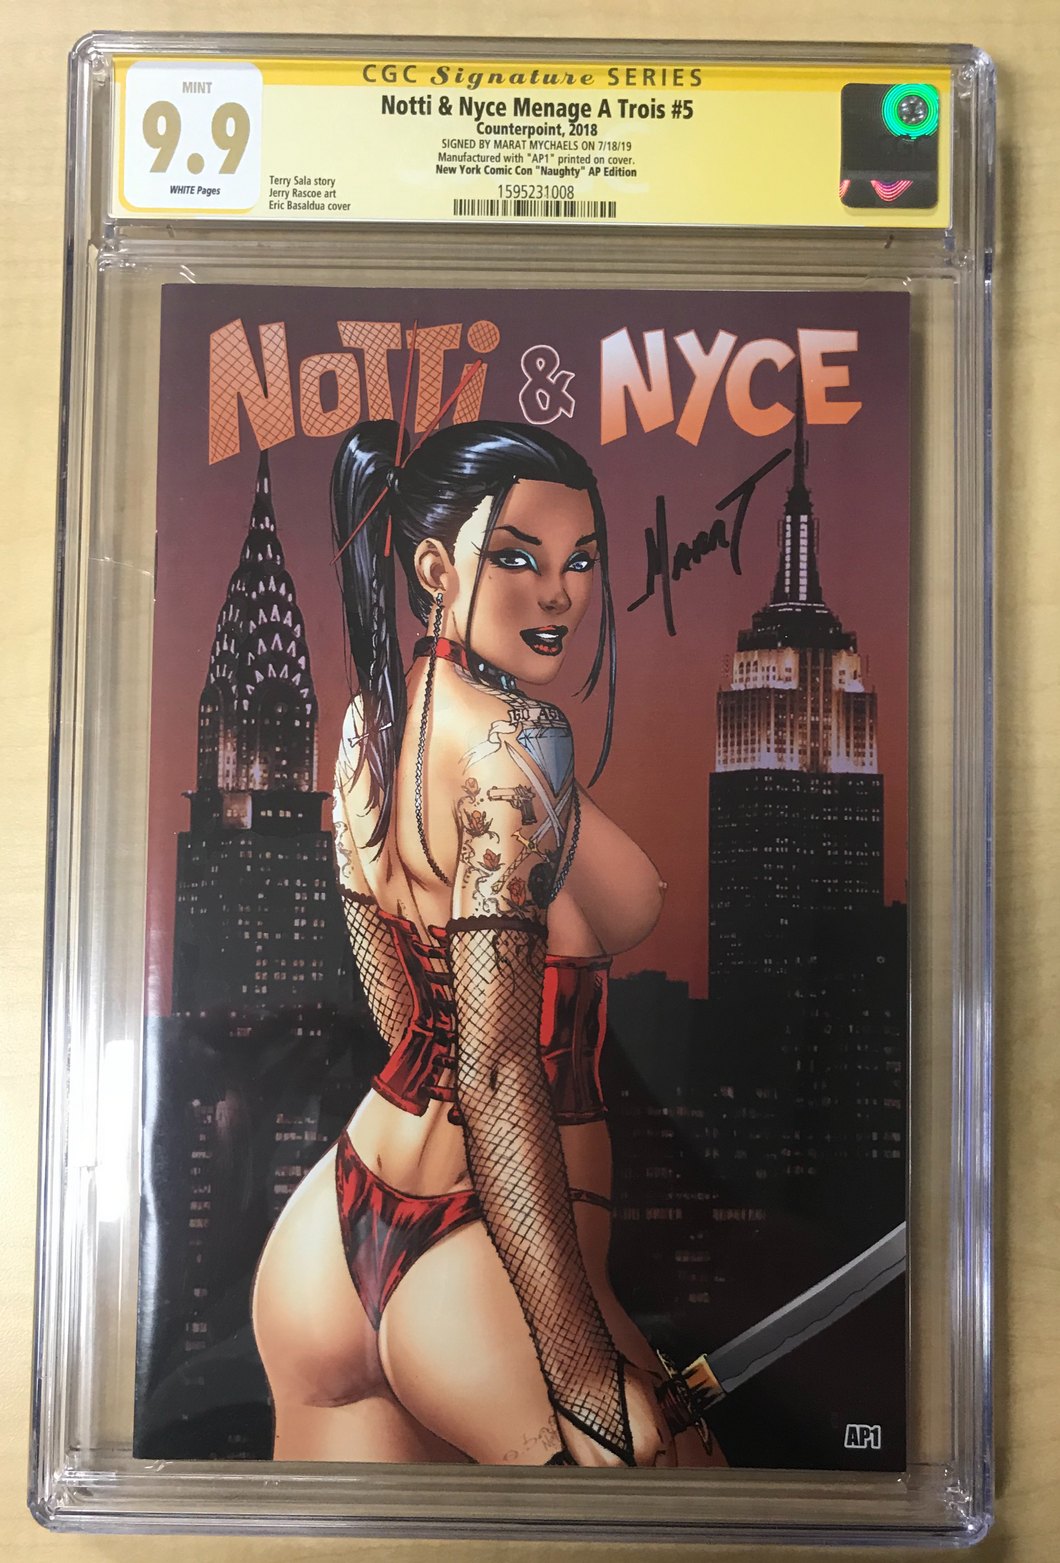 Notti & Nyce Menage a Trois #5 NYCC Exclusive NAUGHTY Variant Cover by EBAS Artist Proof AP1 Signed by Marat Mychaels CGC Signature Series Graded 9.9